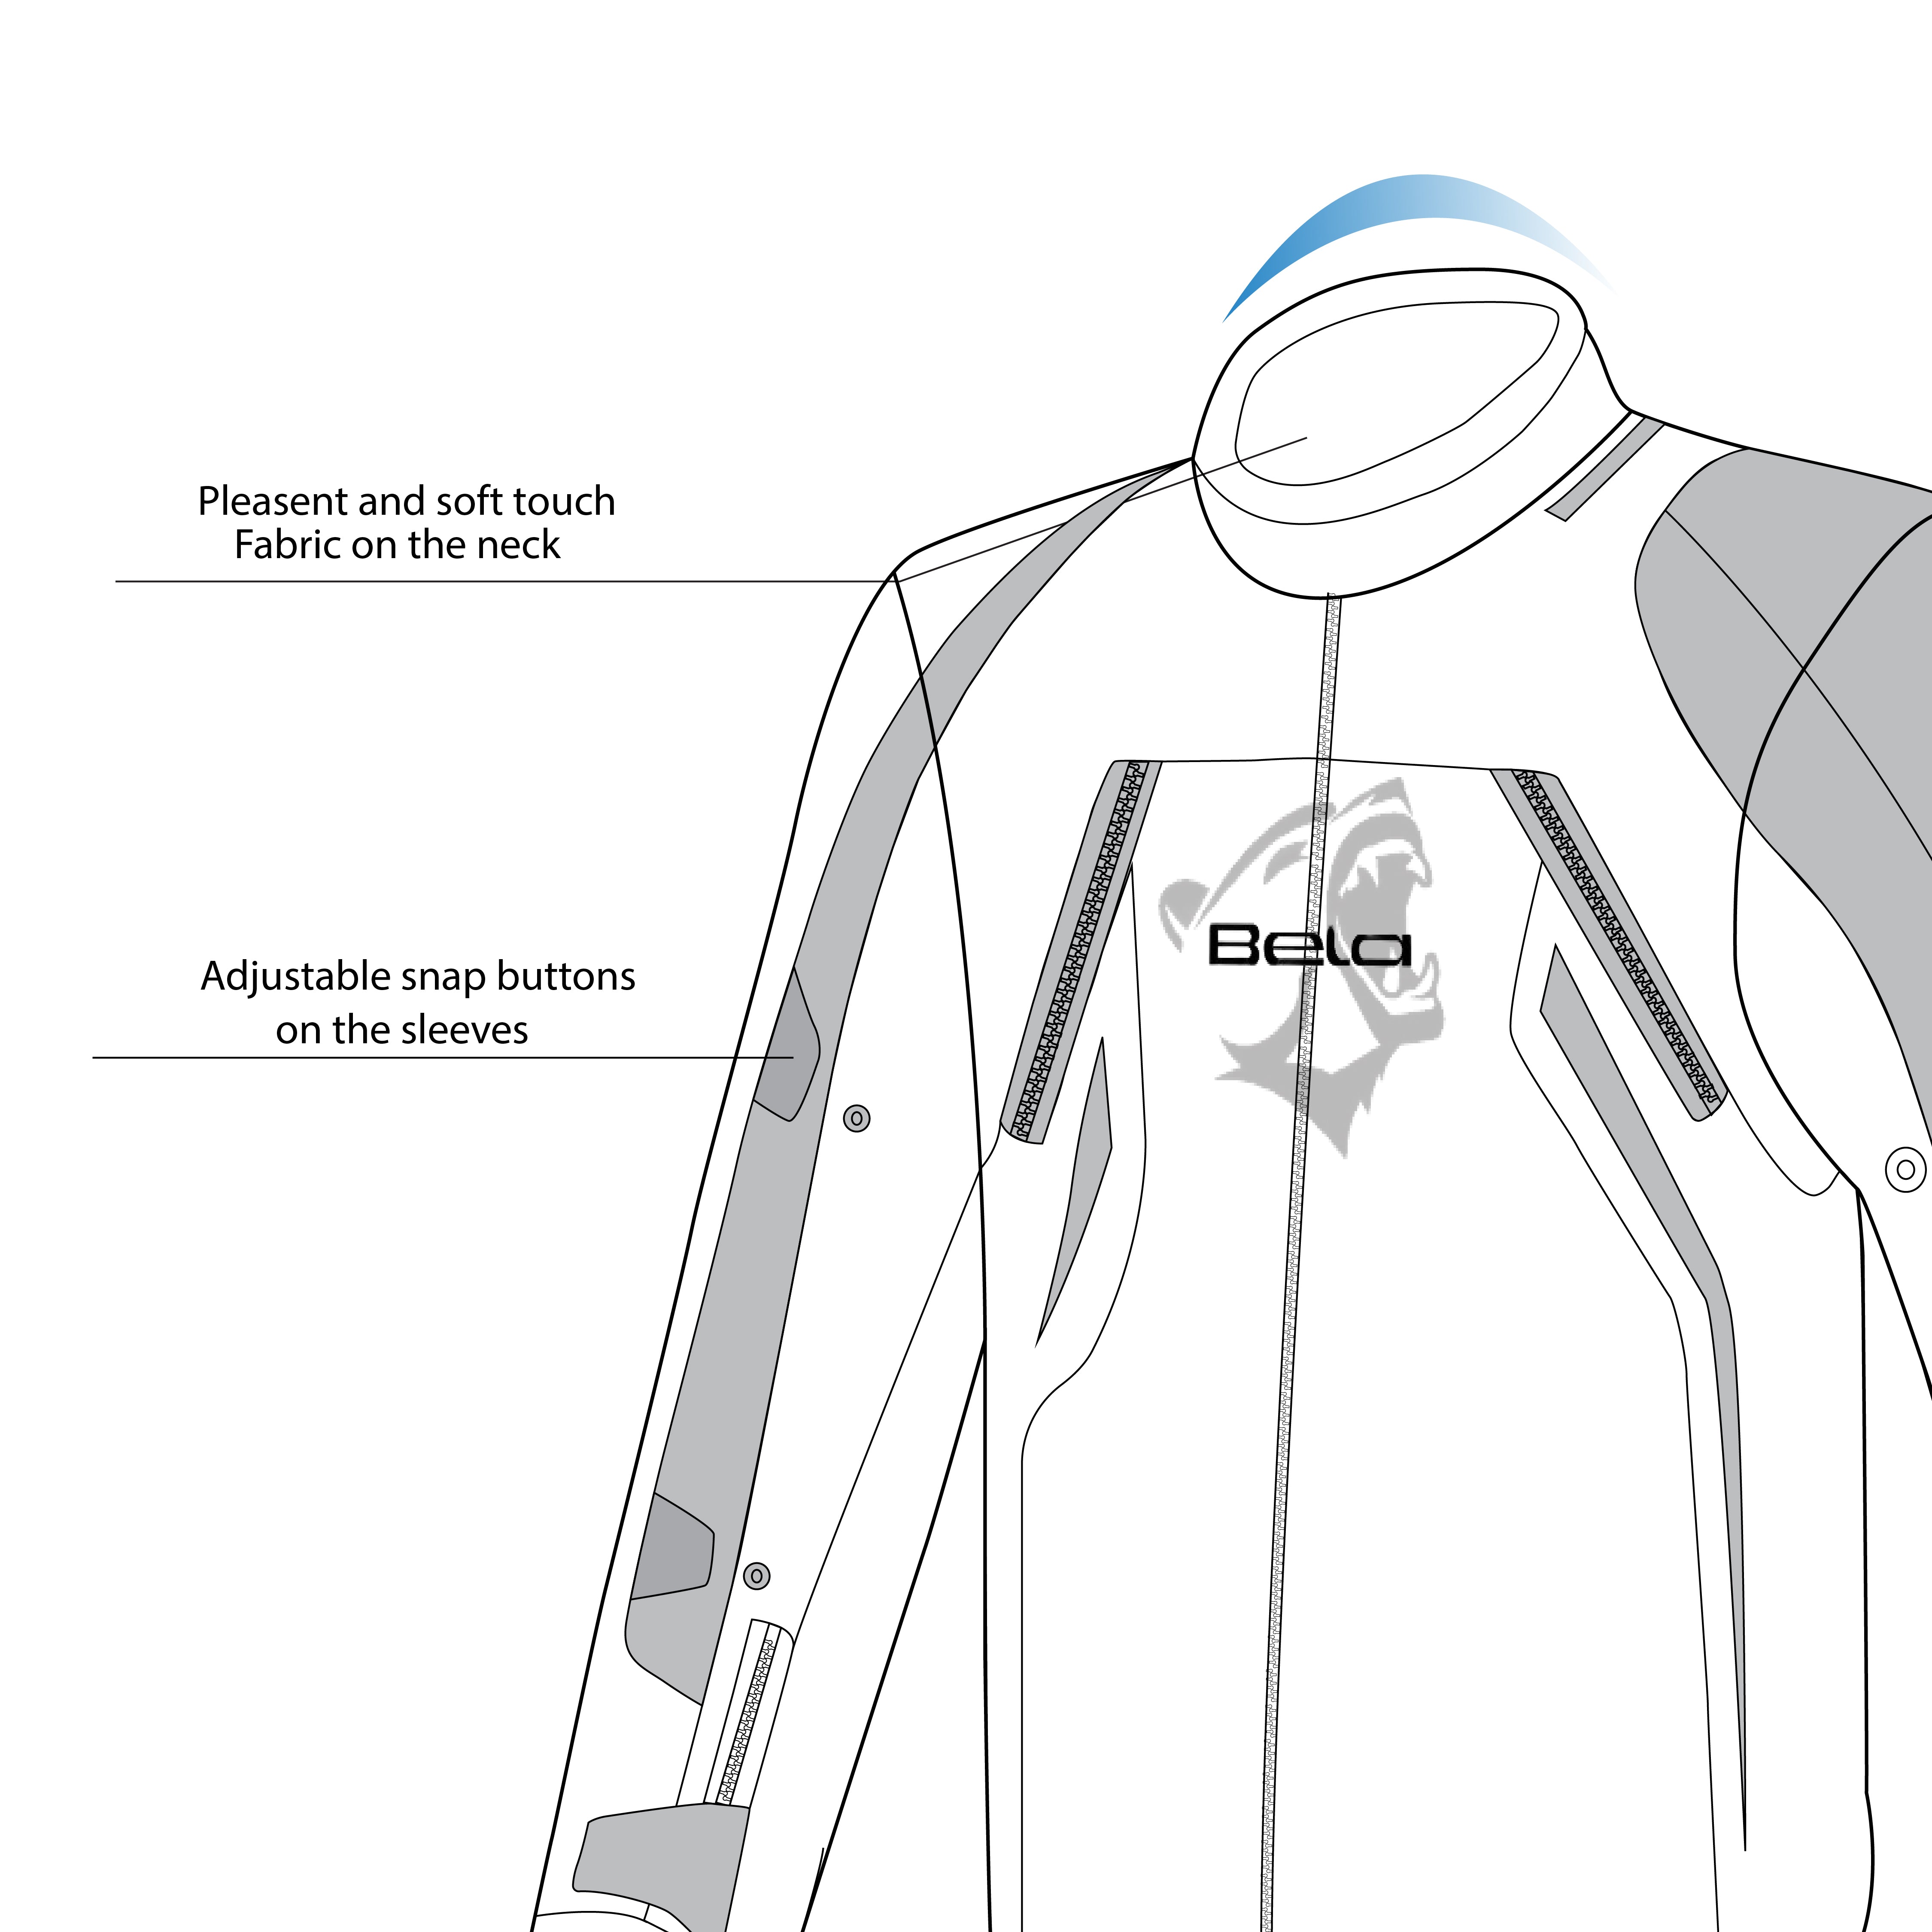 infographic sketch bela elanur lady textile jacket black, dark gray and yellow top front side view